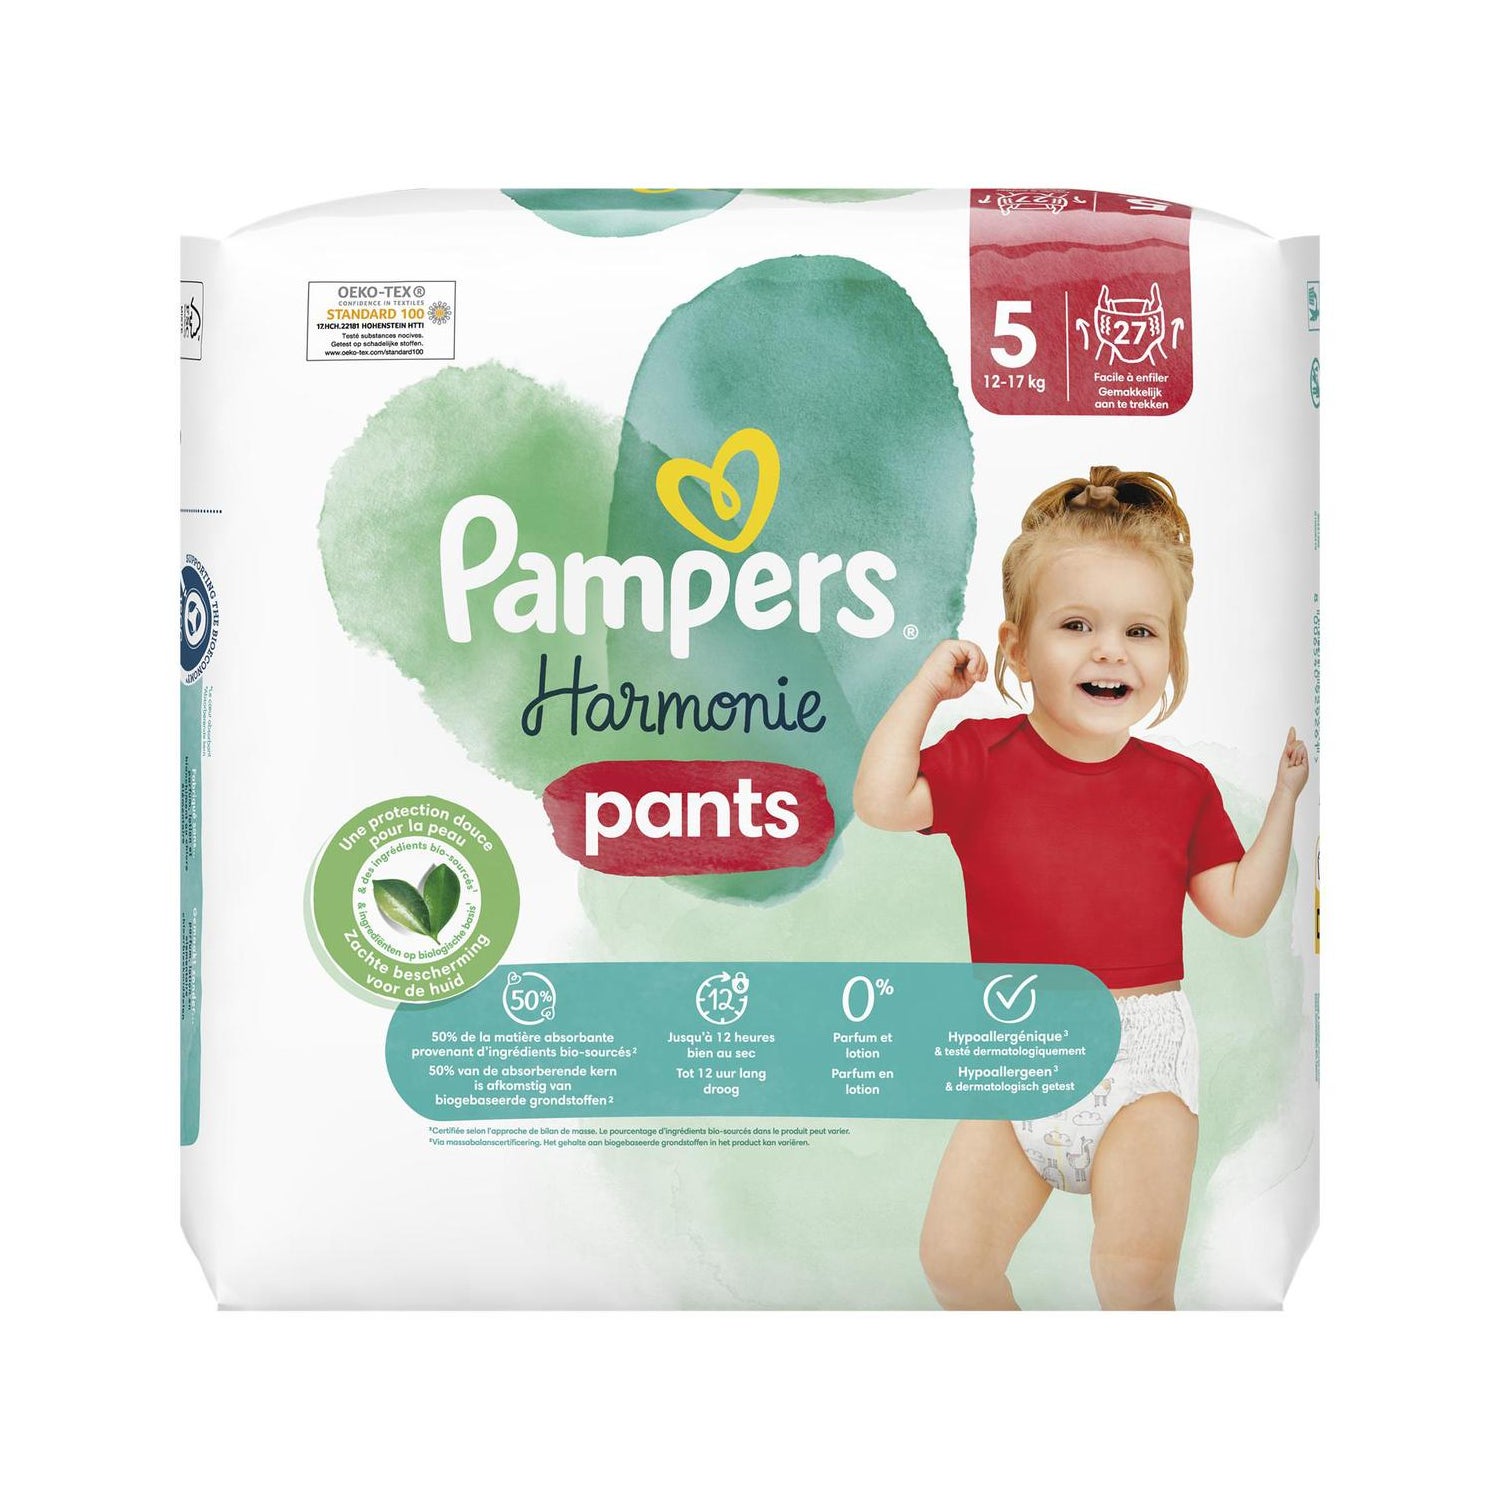 Pampers Baby Dry 12H Couches Taille 4 36uts